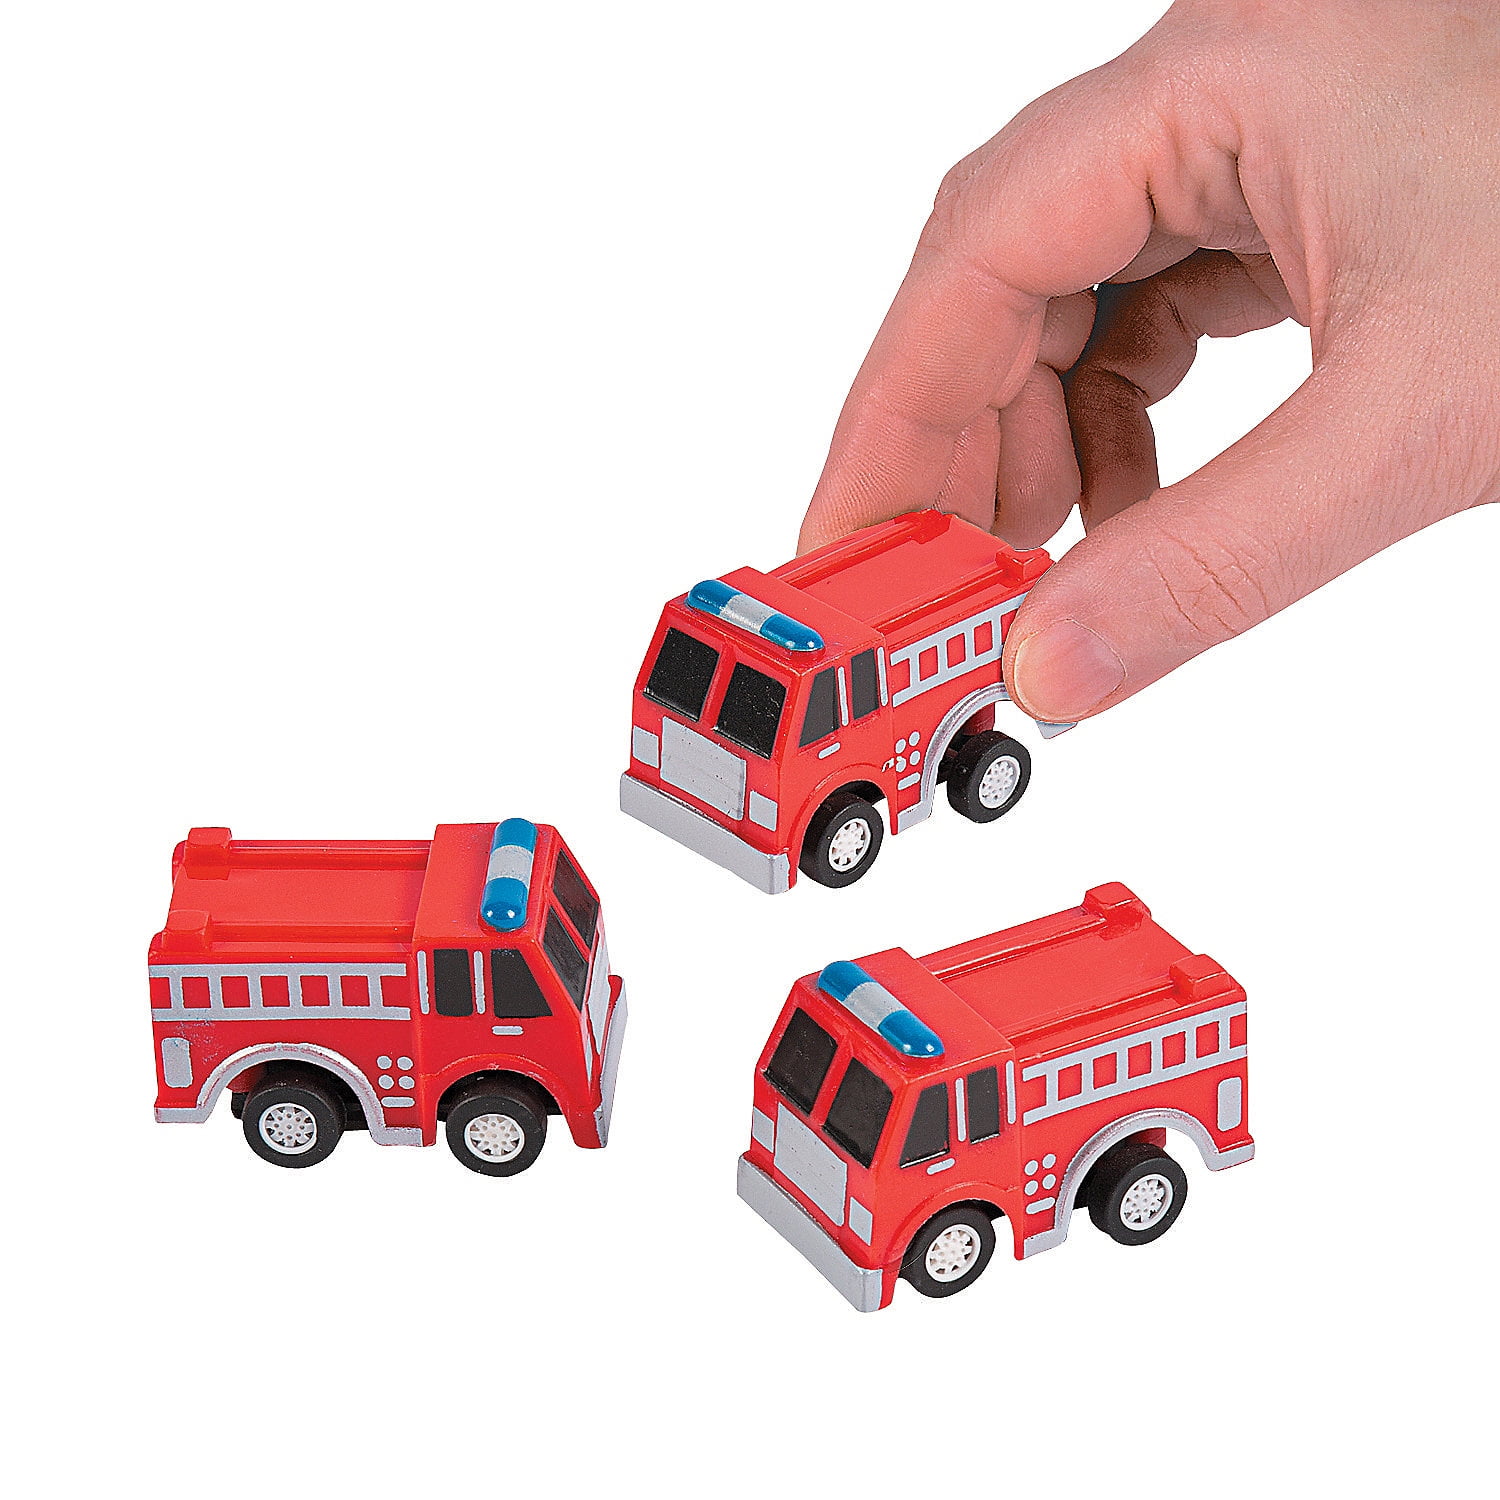 DIY Party Supplies Set of 15 Firefighter Firetruck Baby Shower or Birthday Party DIY Wrapper Favors and Decorations Fired Up Fire Truck 